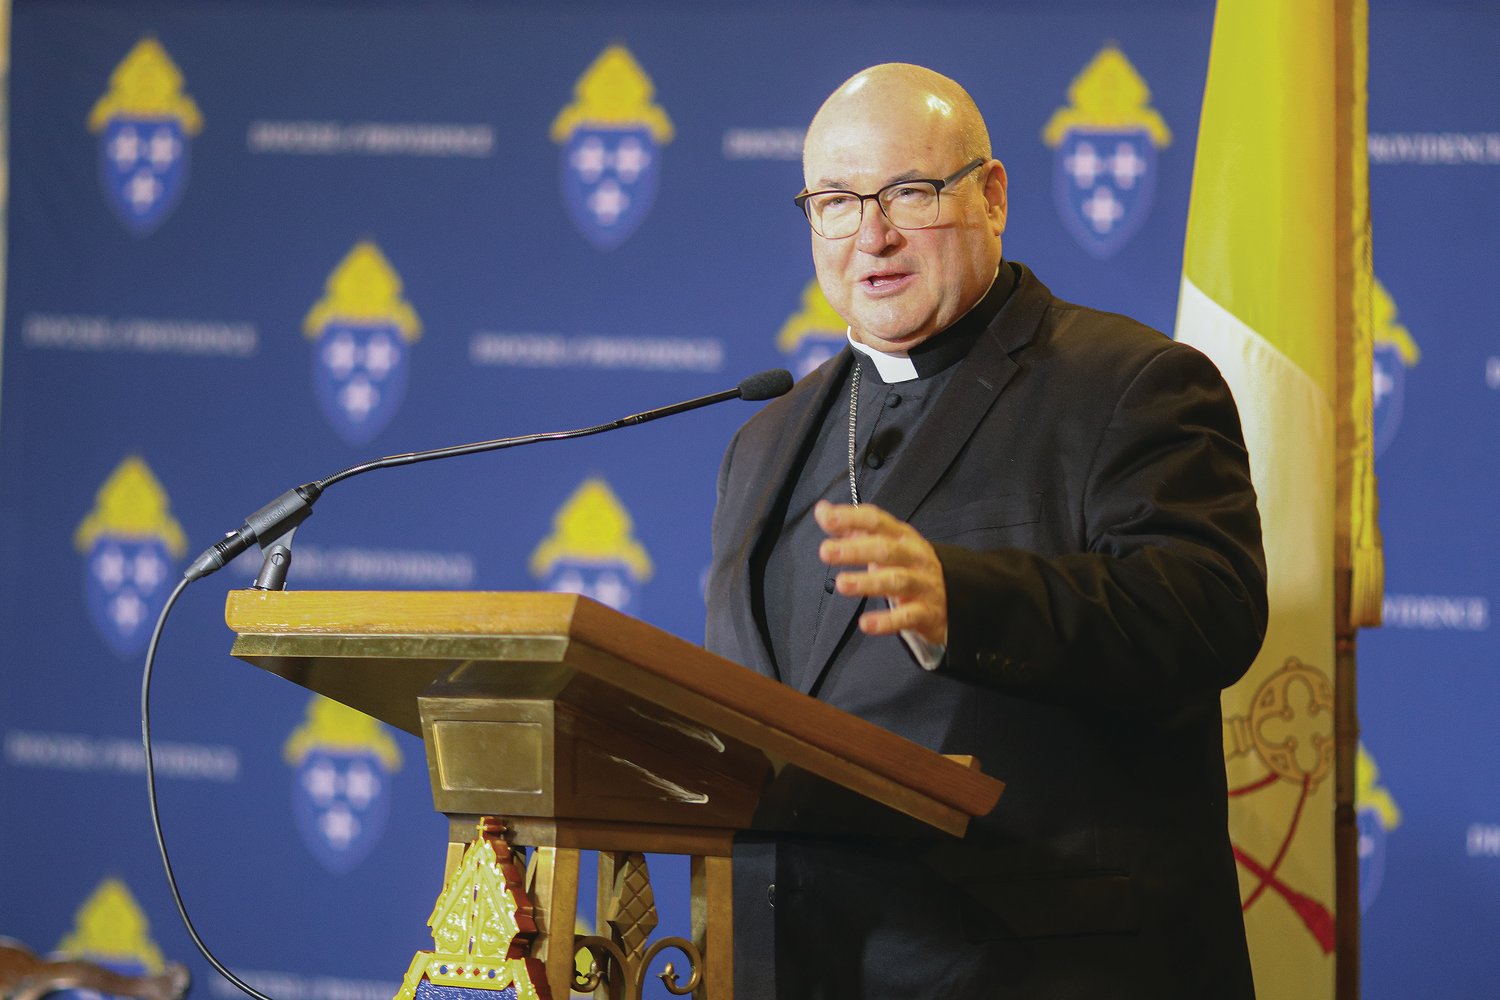 Pope Francis has appointed Most Reverend Richard G. Henning, S.T.D., as Coadjutor Bishop of Providence. The Diocese of Providence held a press conference November 23 with Bishop Tobin and Bishop Henning at the Cathedral of Saints Peter and Paul.